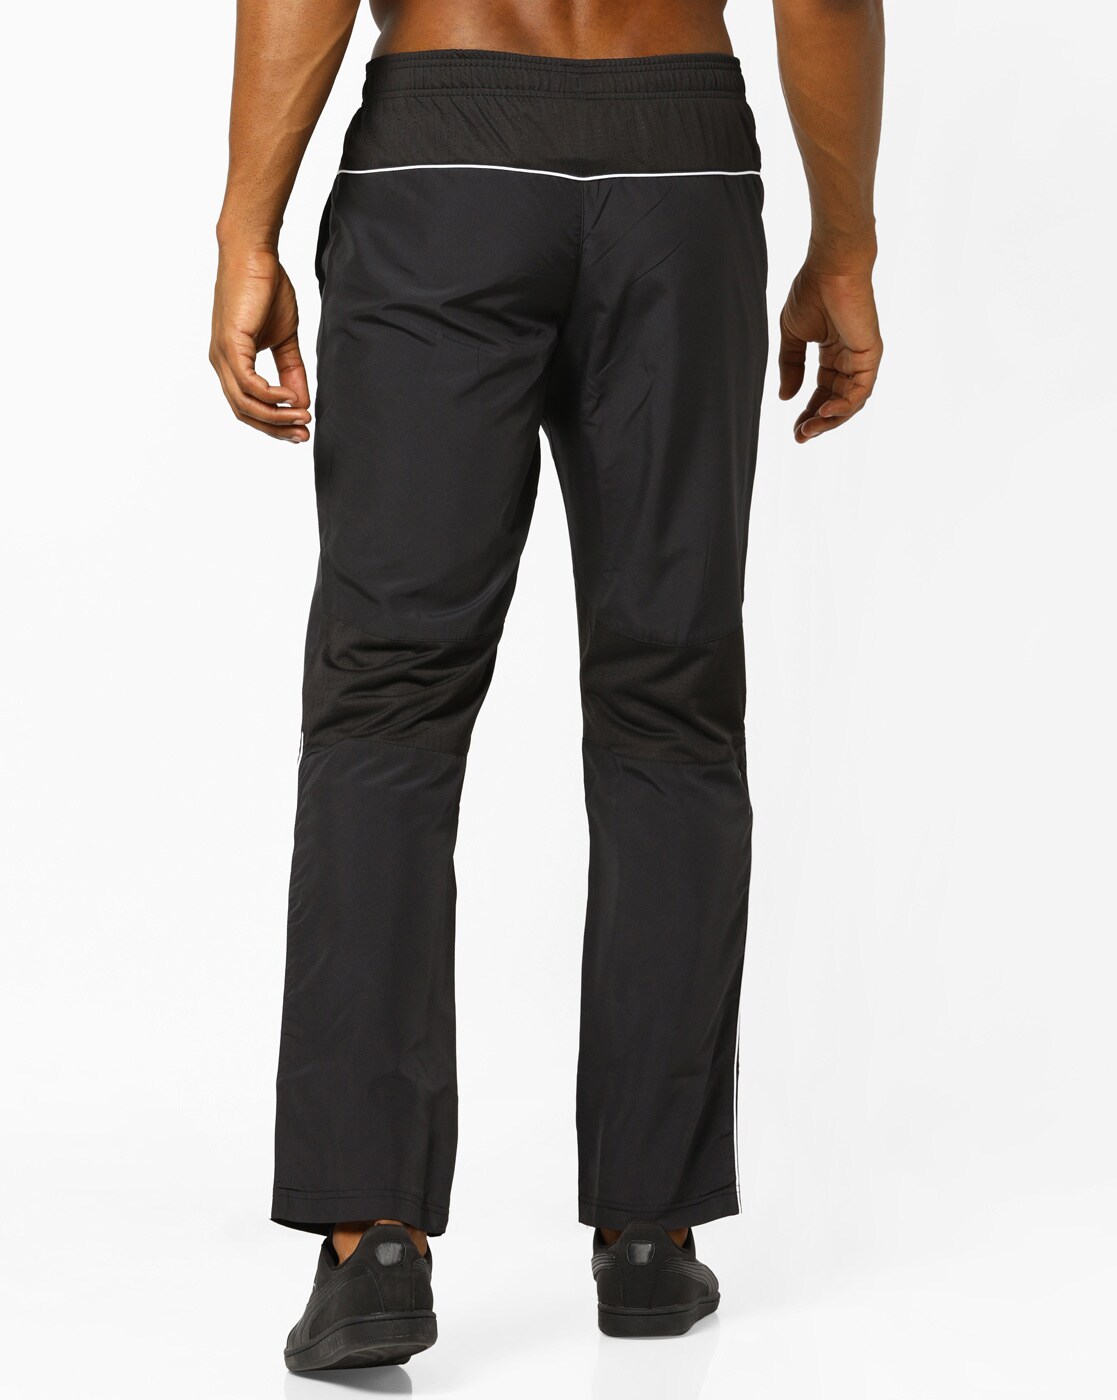 Buy Charcoal Grey Track Pants for Men by PERFORMAX Online  Ajiocom